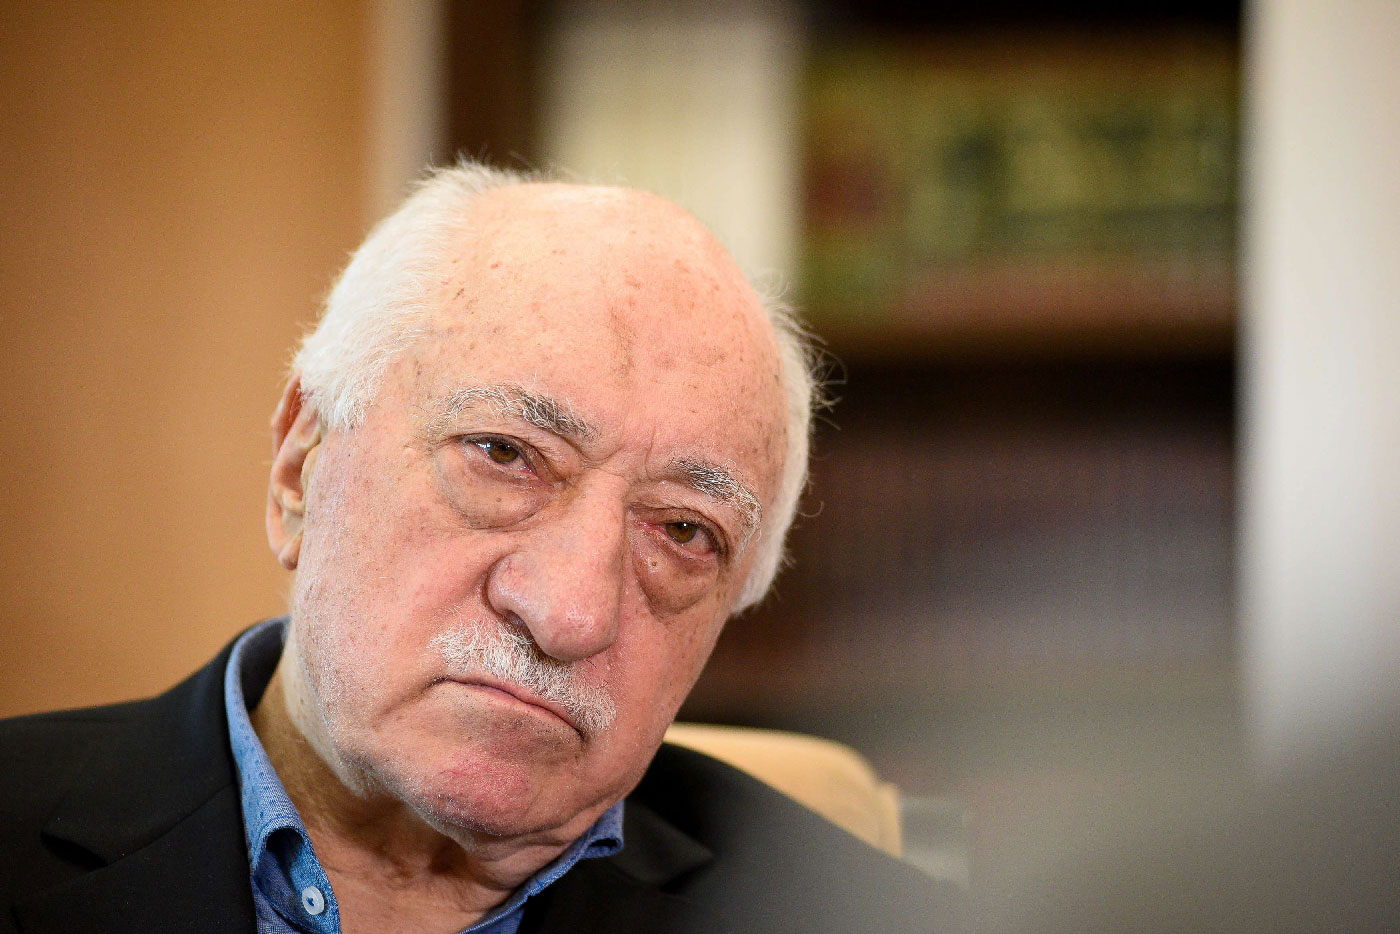 Gulen strongly denies the accusation of responsibility for the coup attempt